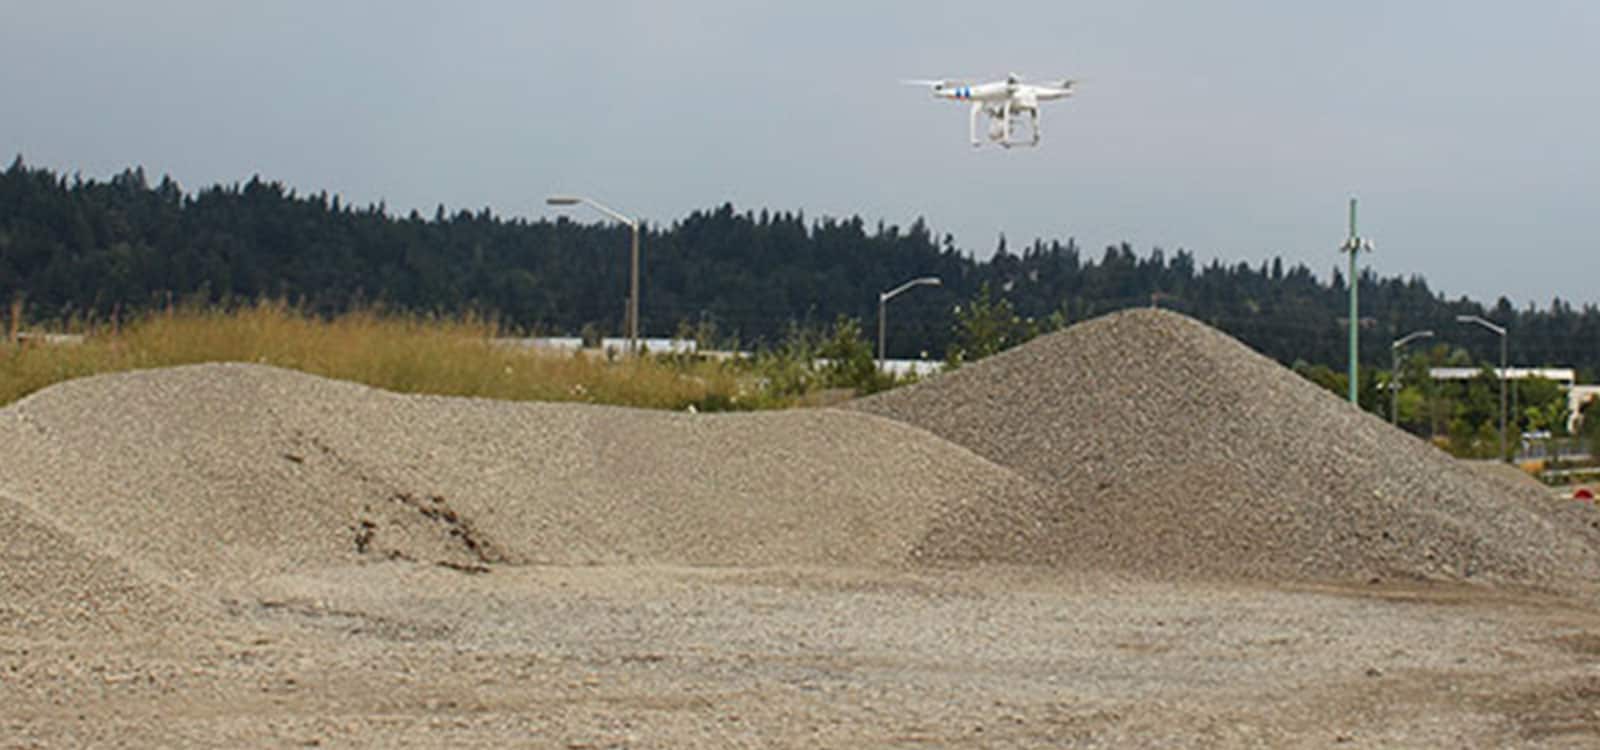 A Big Year for Drones | Stockpile Measurement | Blog | Stockpile Reports